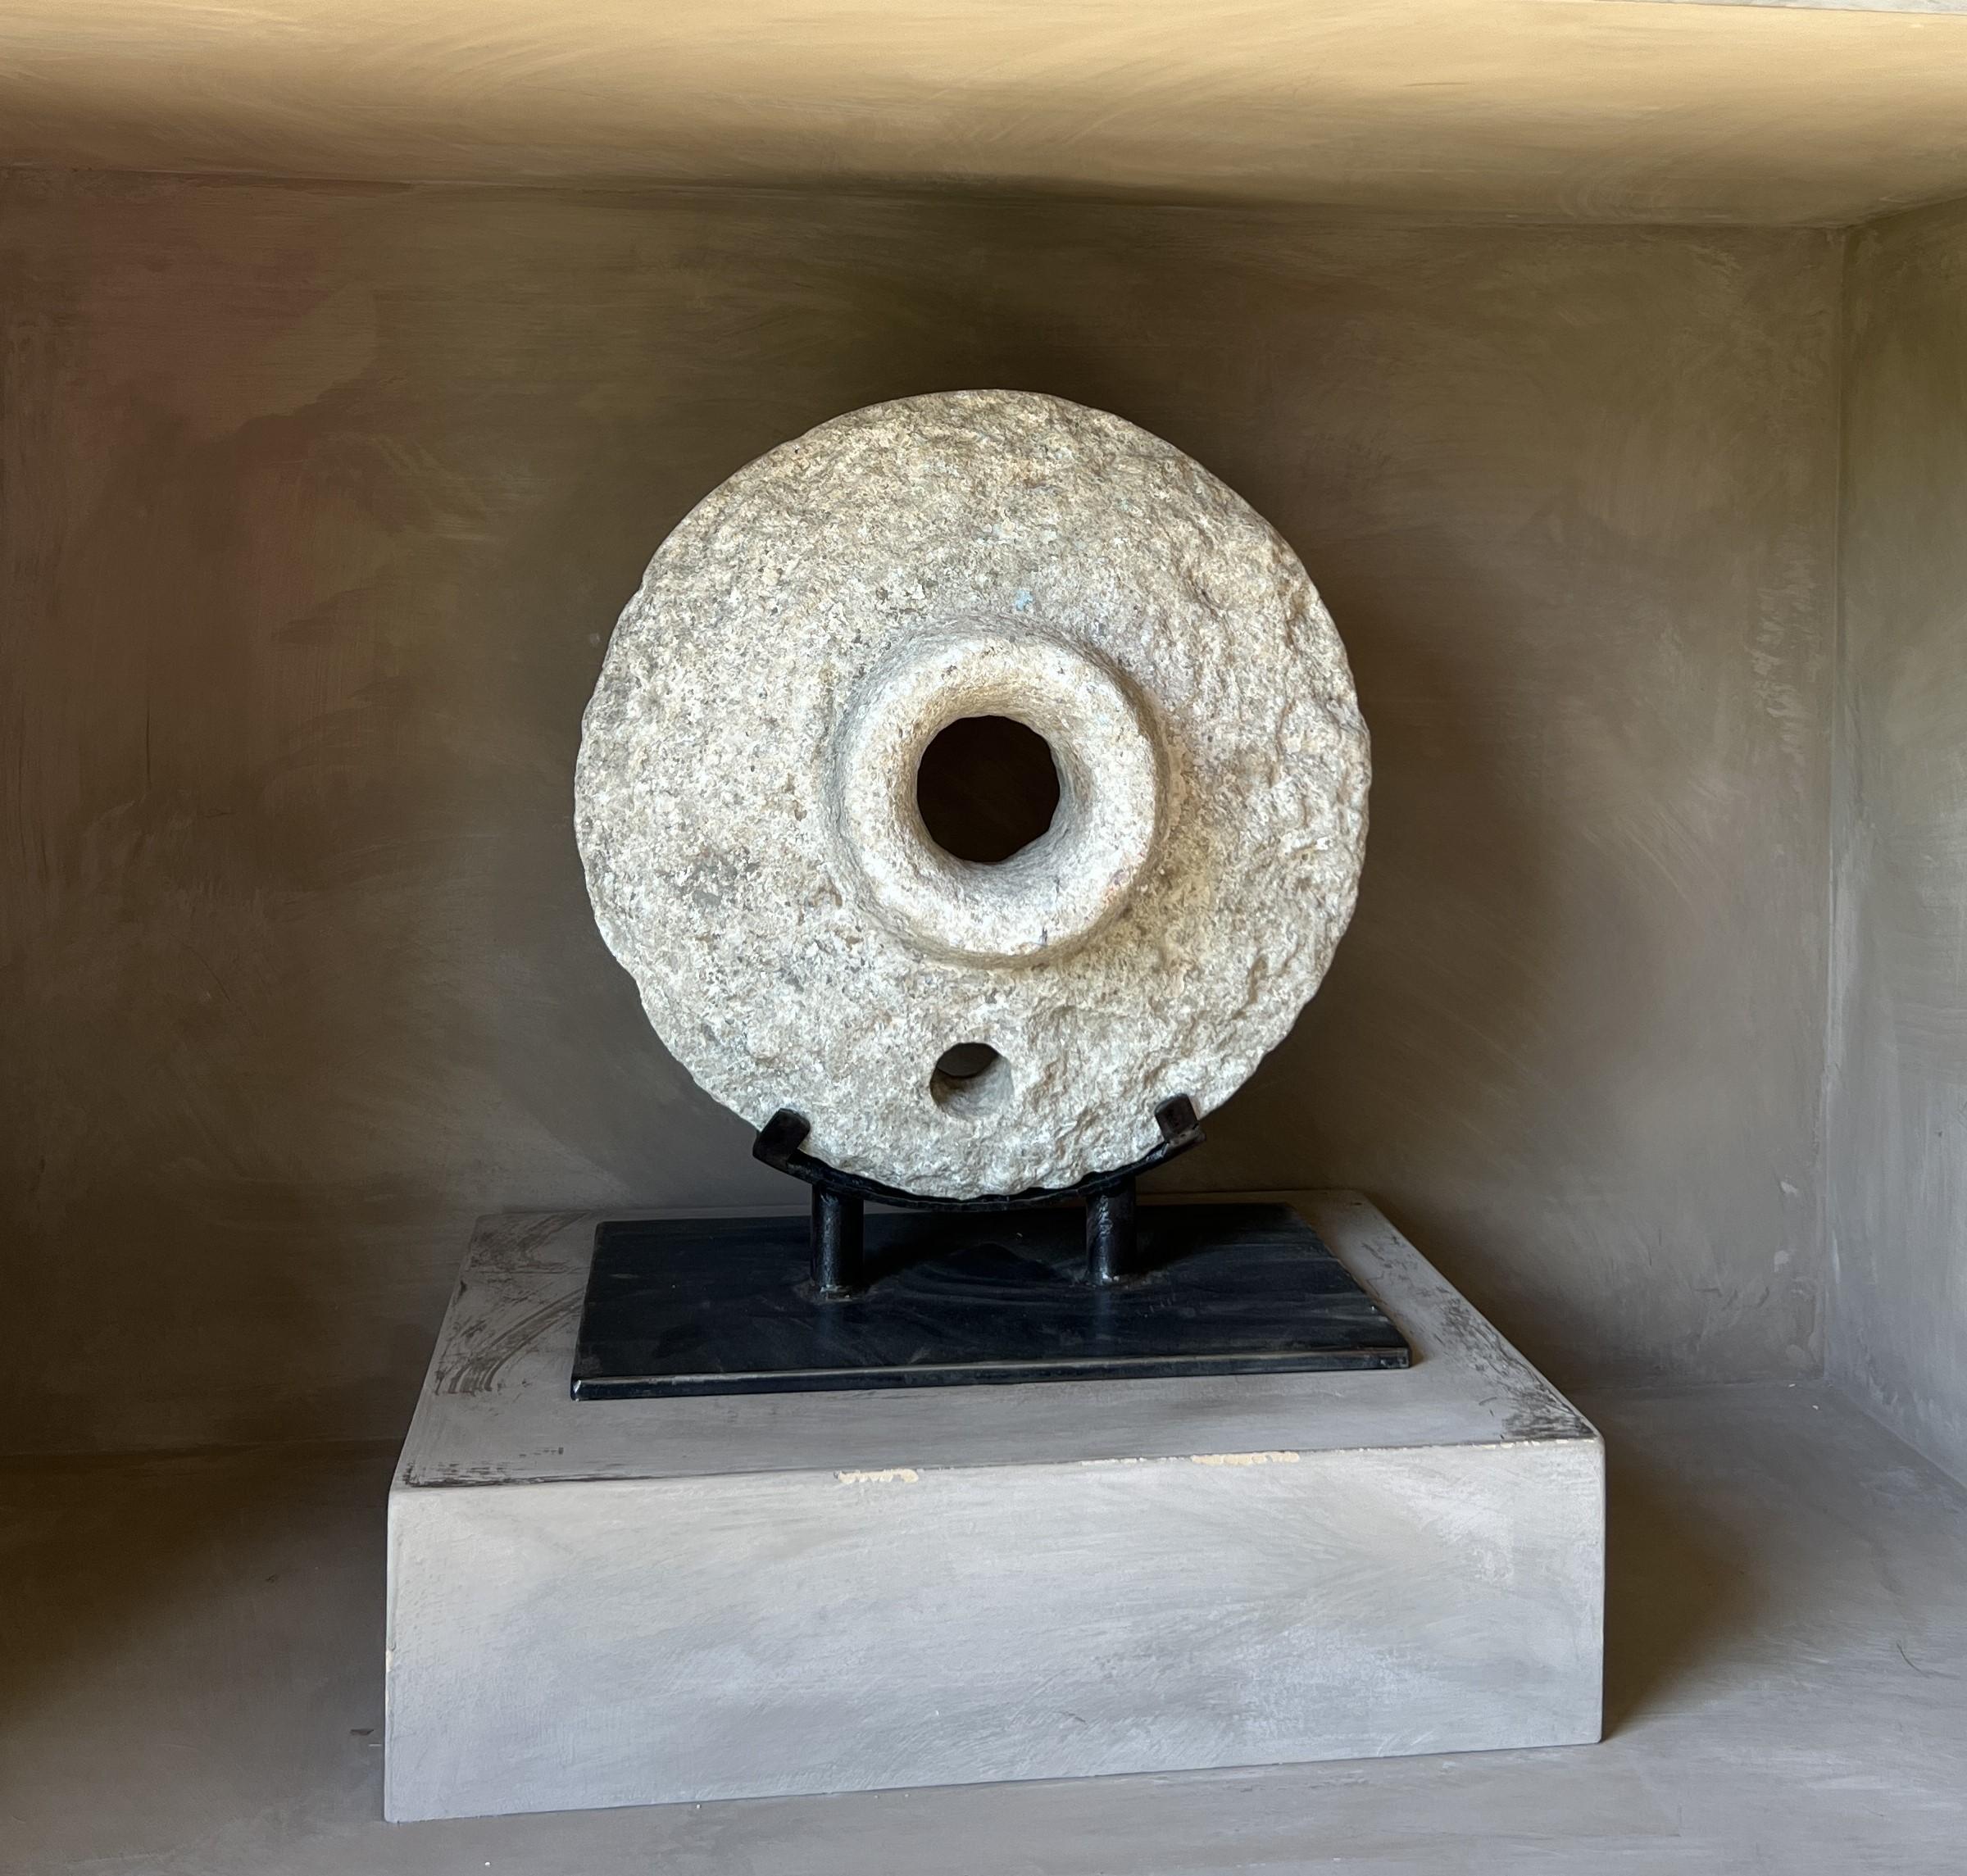 Interesting circular stone object. Most probably the lid of a stone mortar as examples found in south east Asia. 
Mounted on a custom stand it has its own sculptural quality. Combined with a beautiful color and patina it has a positive attractive